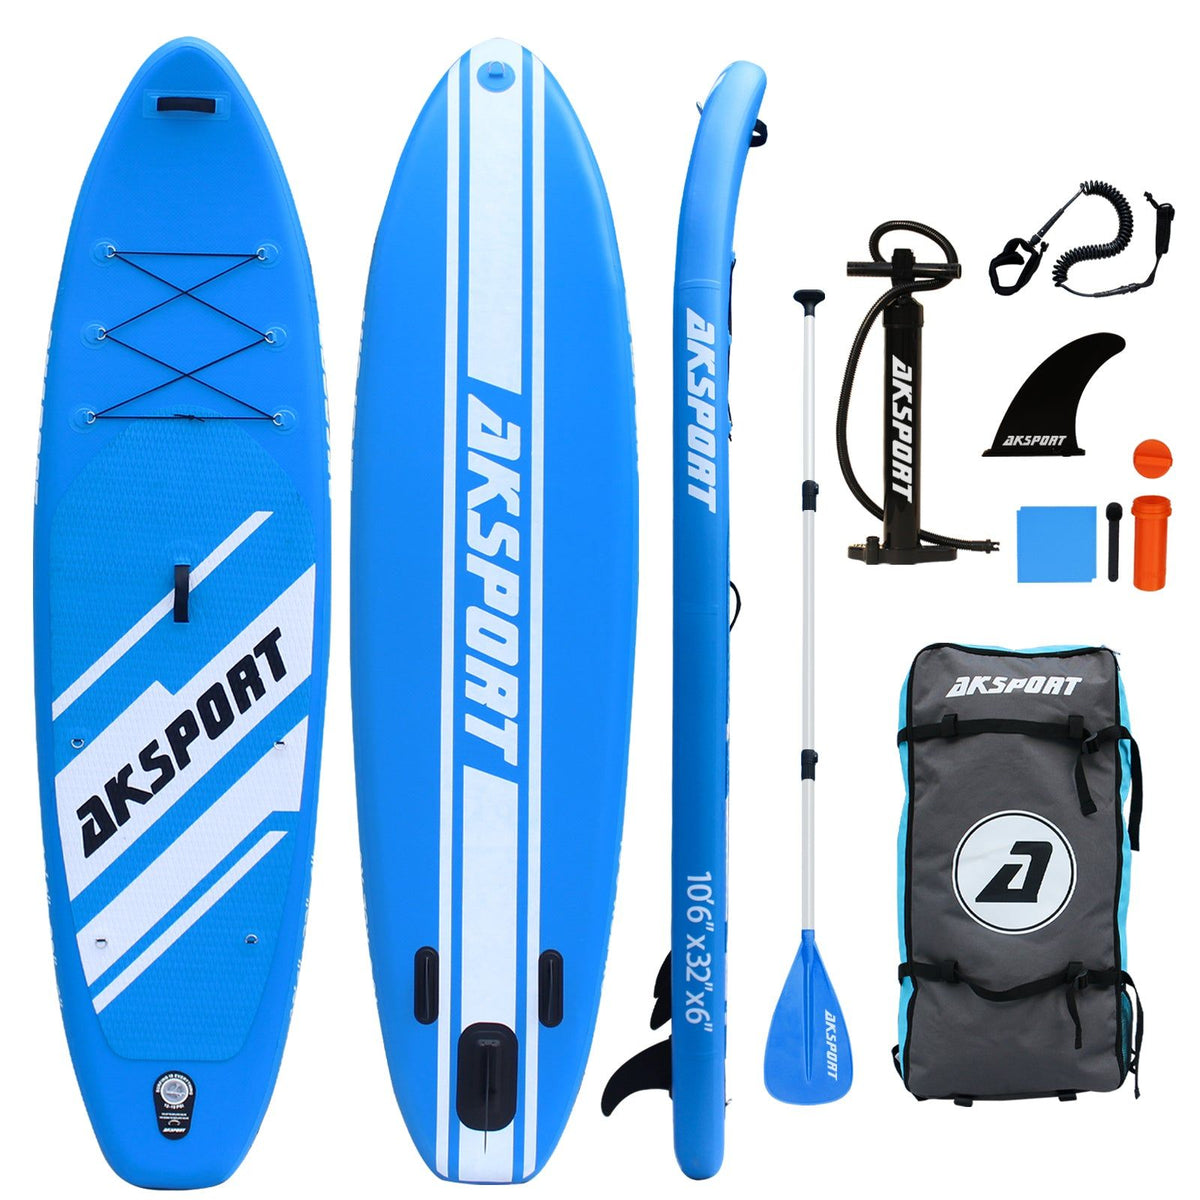 AKSPORT 10'6" Inflatable Stand-up Paddle Board Package Blue - AKSPORT